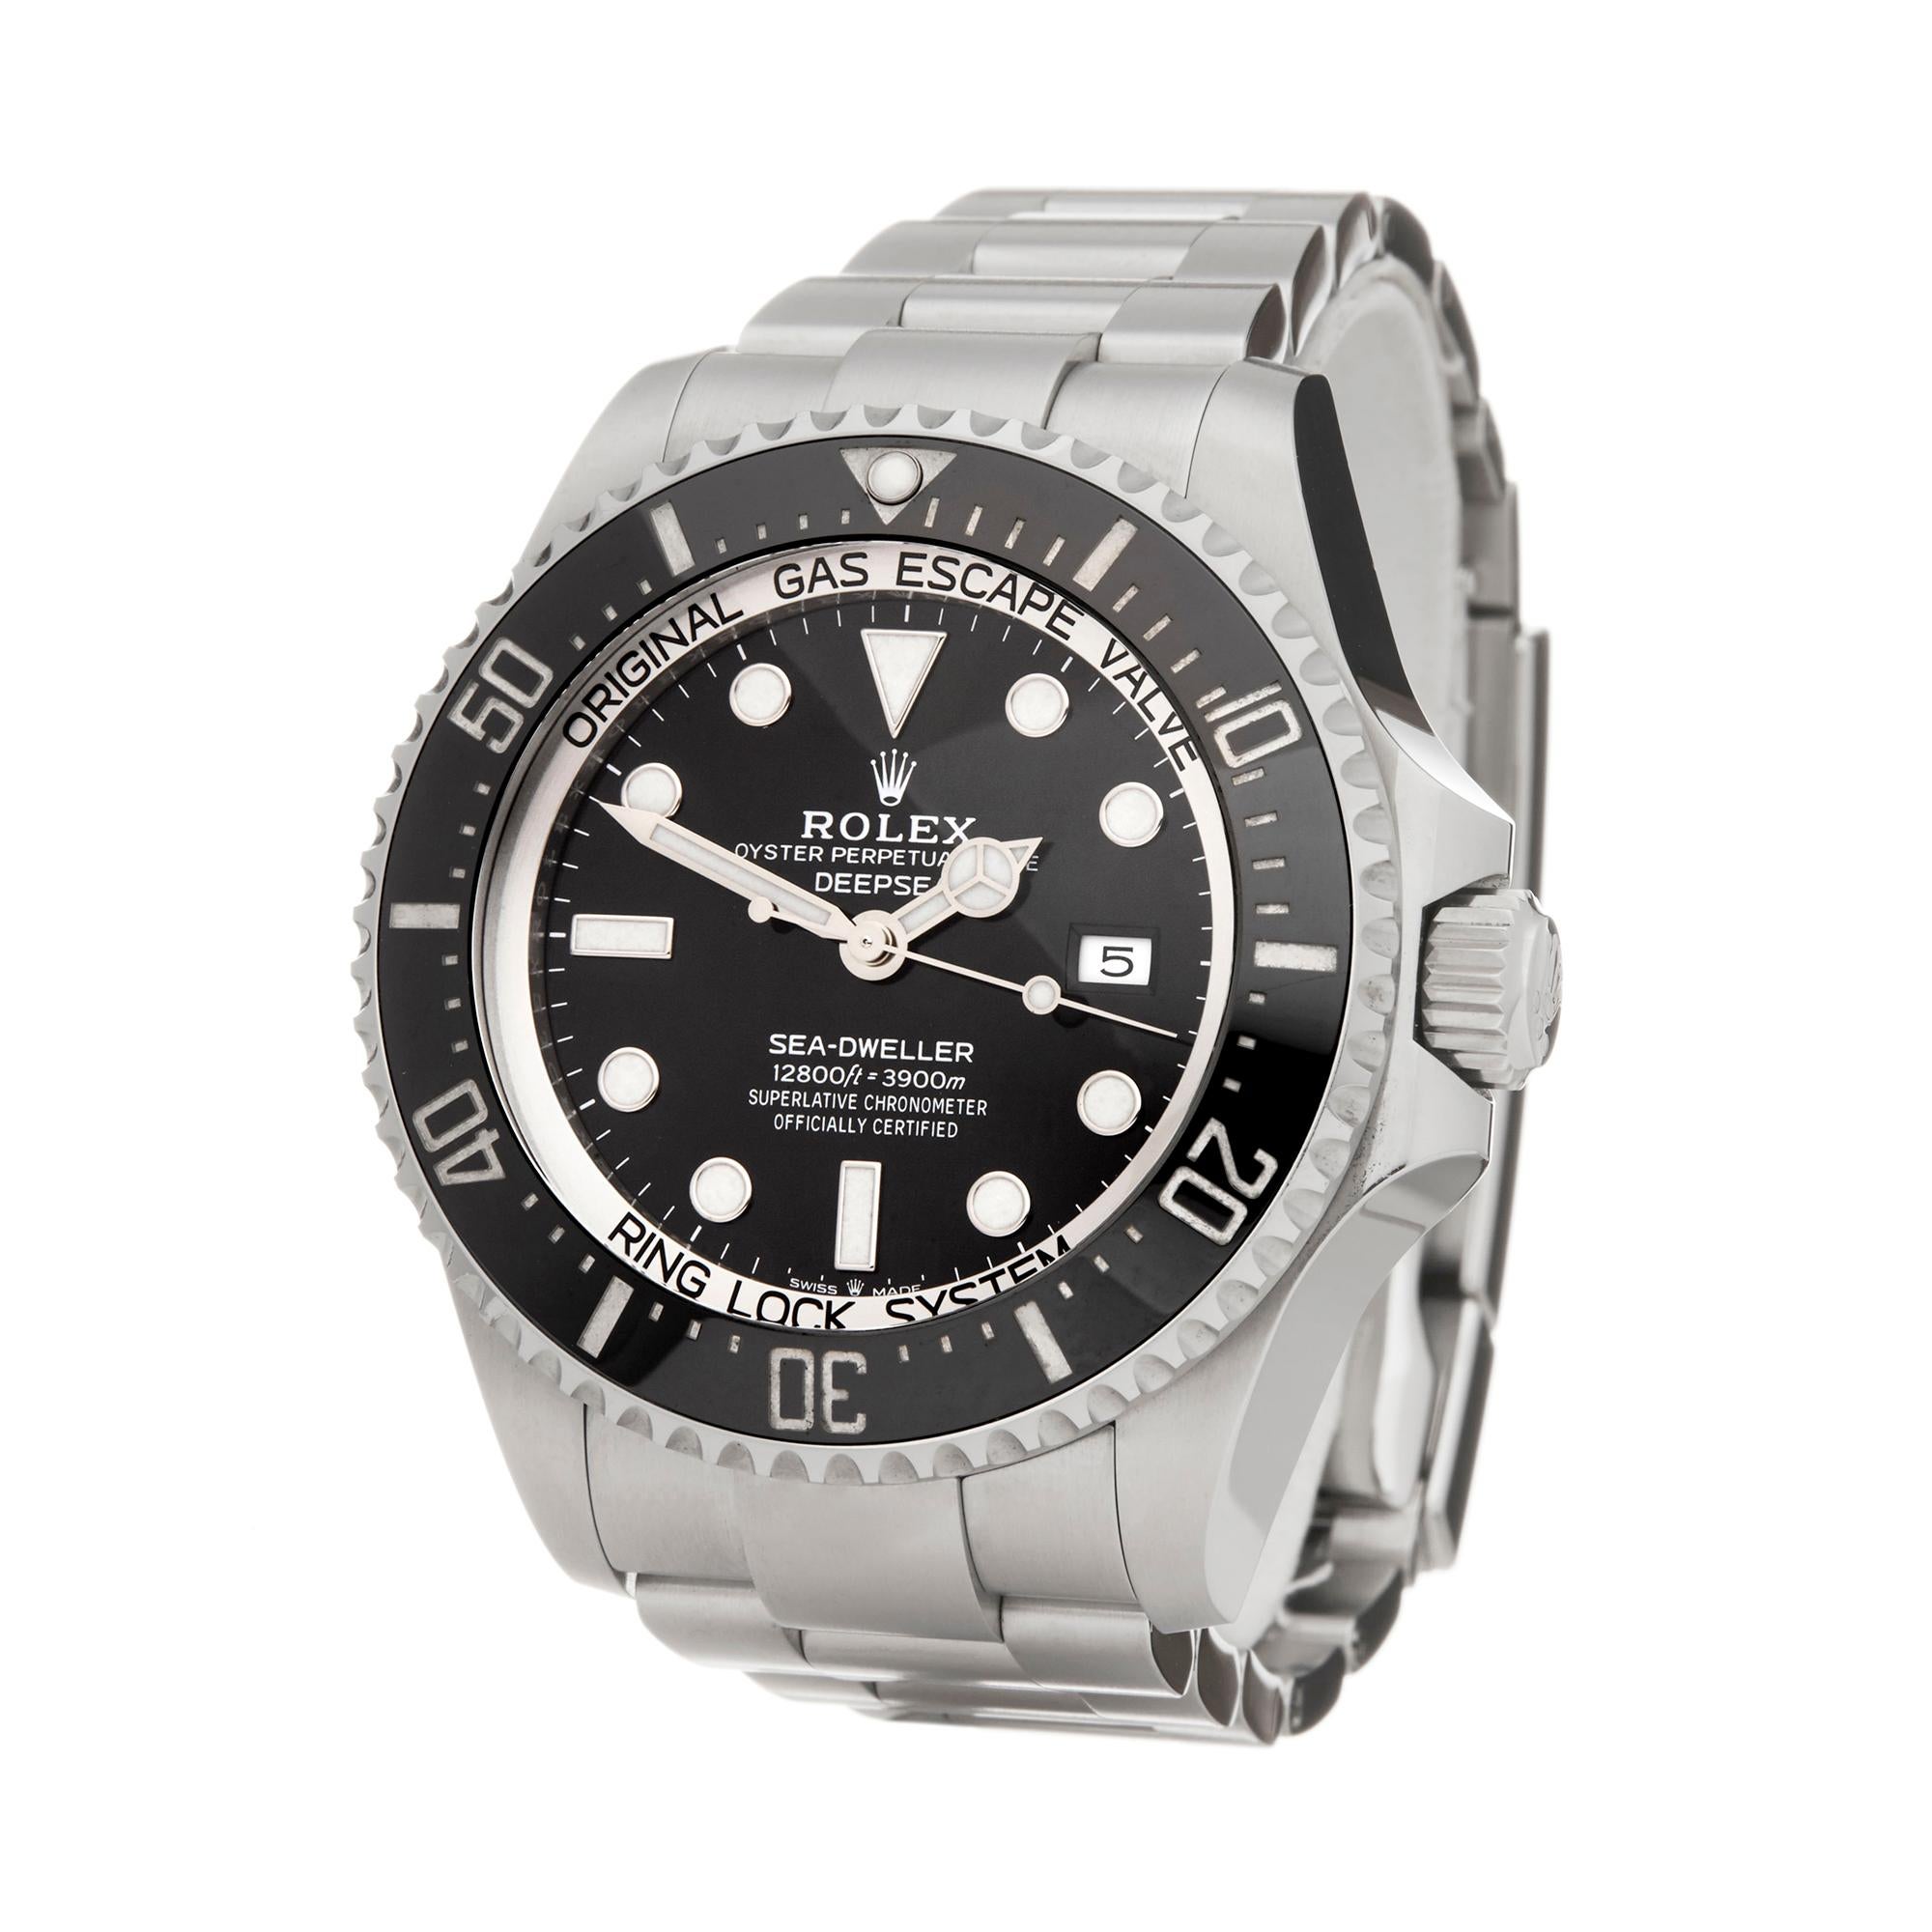 Ref: W6171
Manufacturer: Rolex
Model: Sea-Dweller 
Model Ref: 126660
Age: 27th May 2018
Gender: Mens
Complete With: Box, Manuals, Guarantee, Card Holder & Swing Tags
Dial: Black Other
Glass: Sapphire Crystal
Movement: Automatic
Water Resistance: To